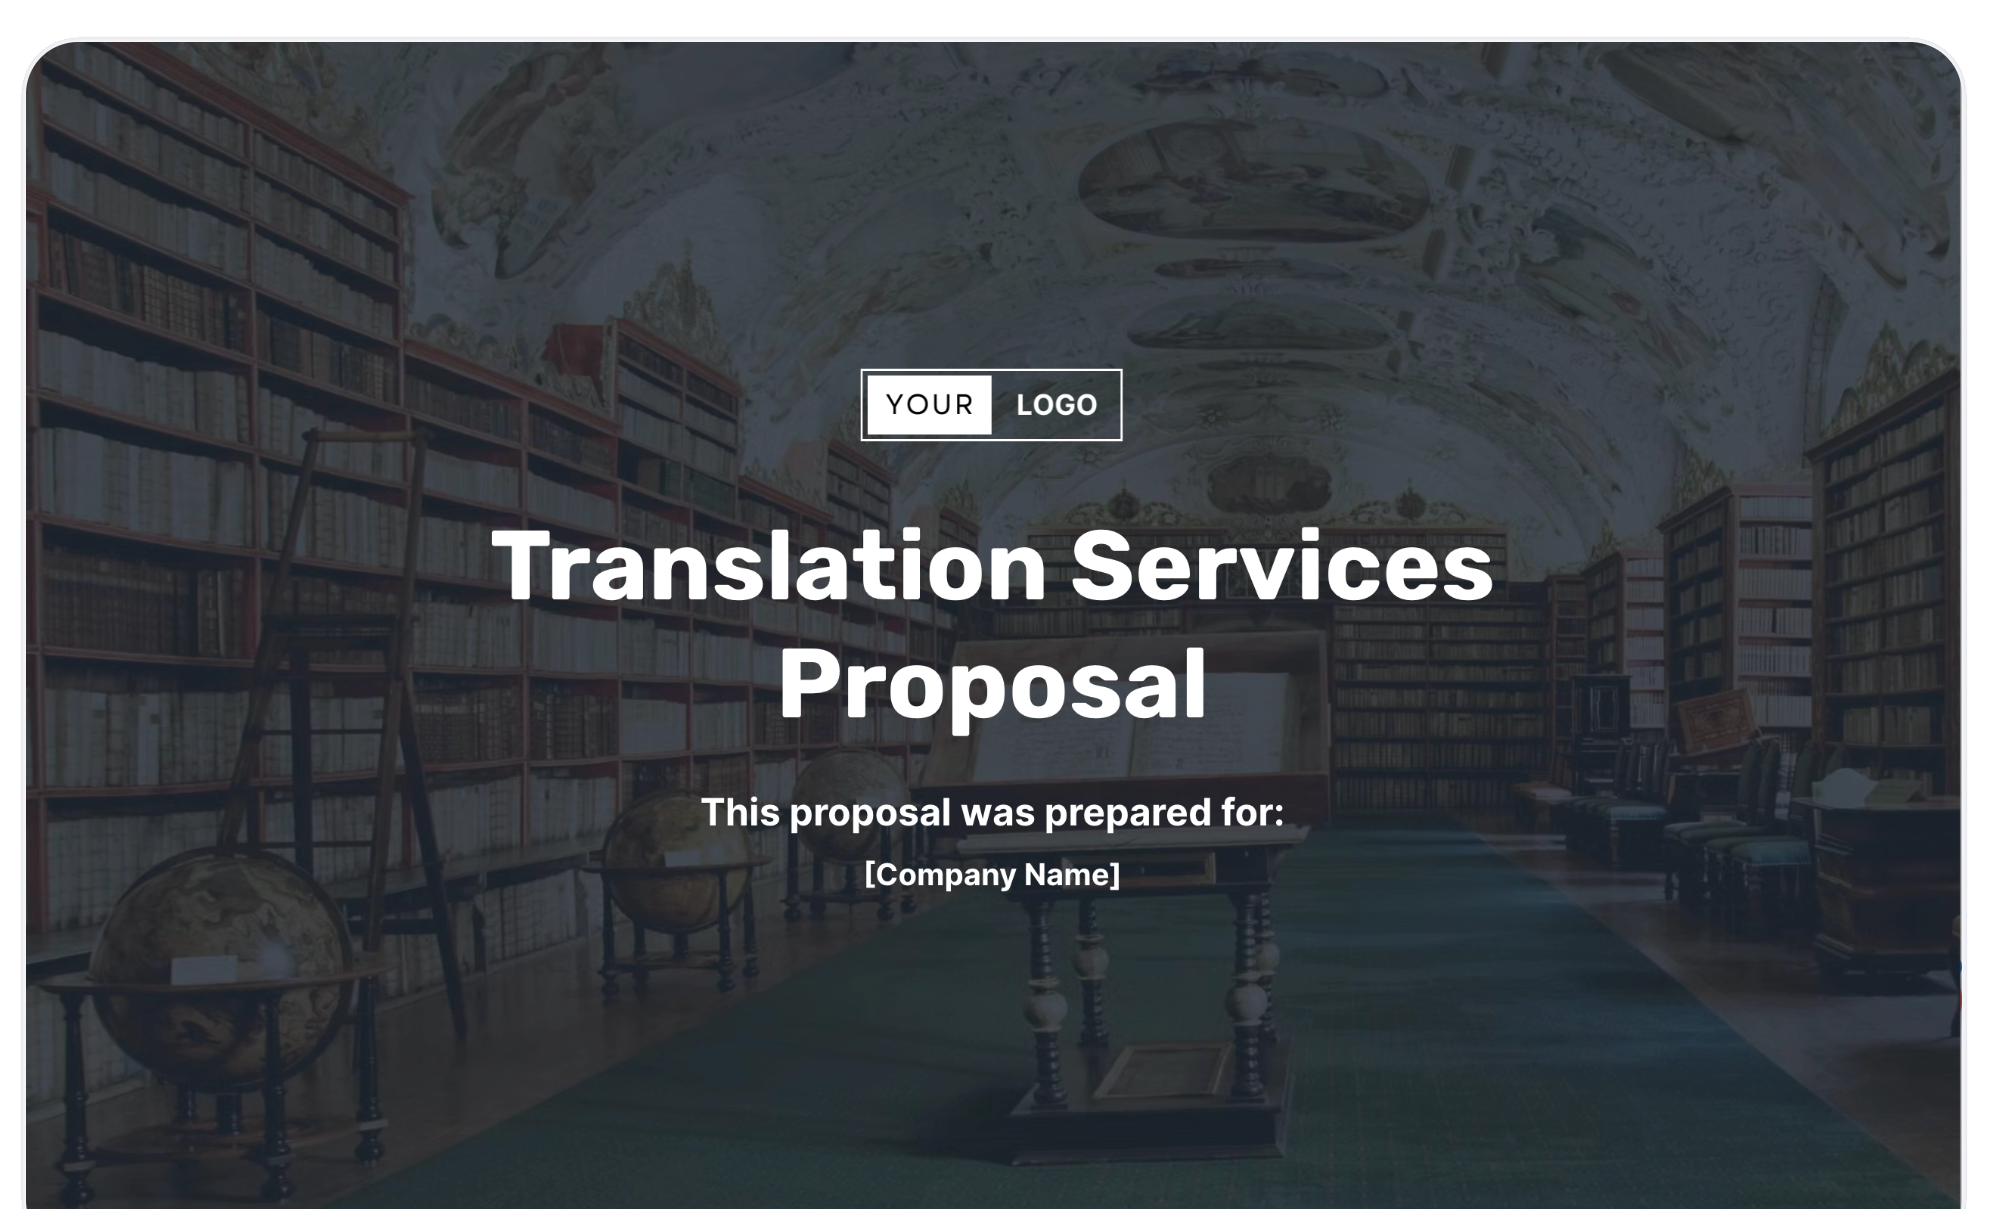 a proposal for translation services is displayed in a library